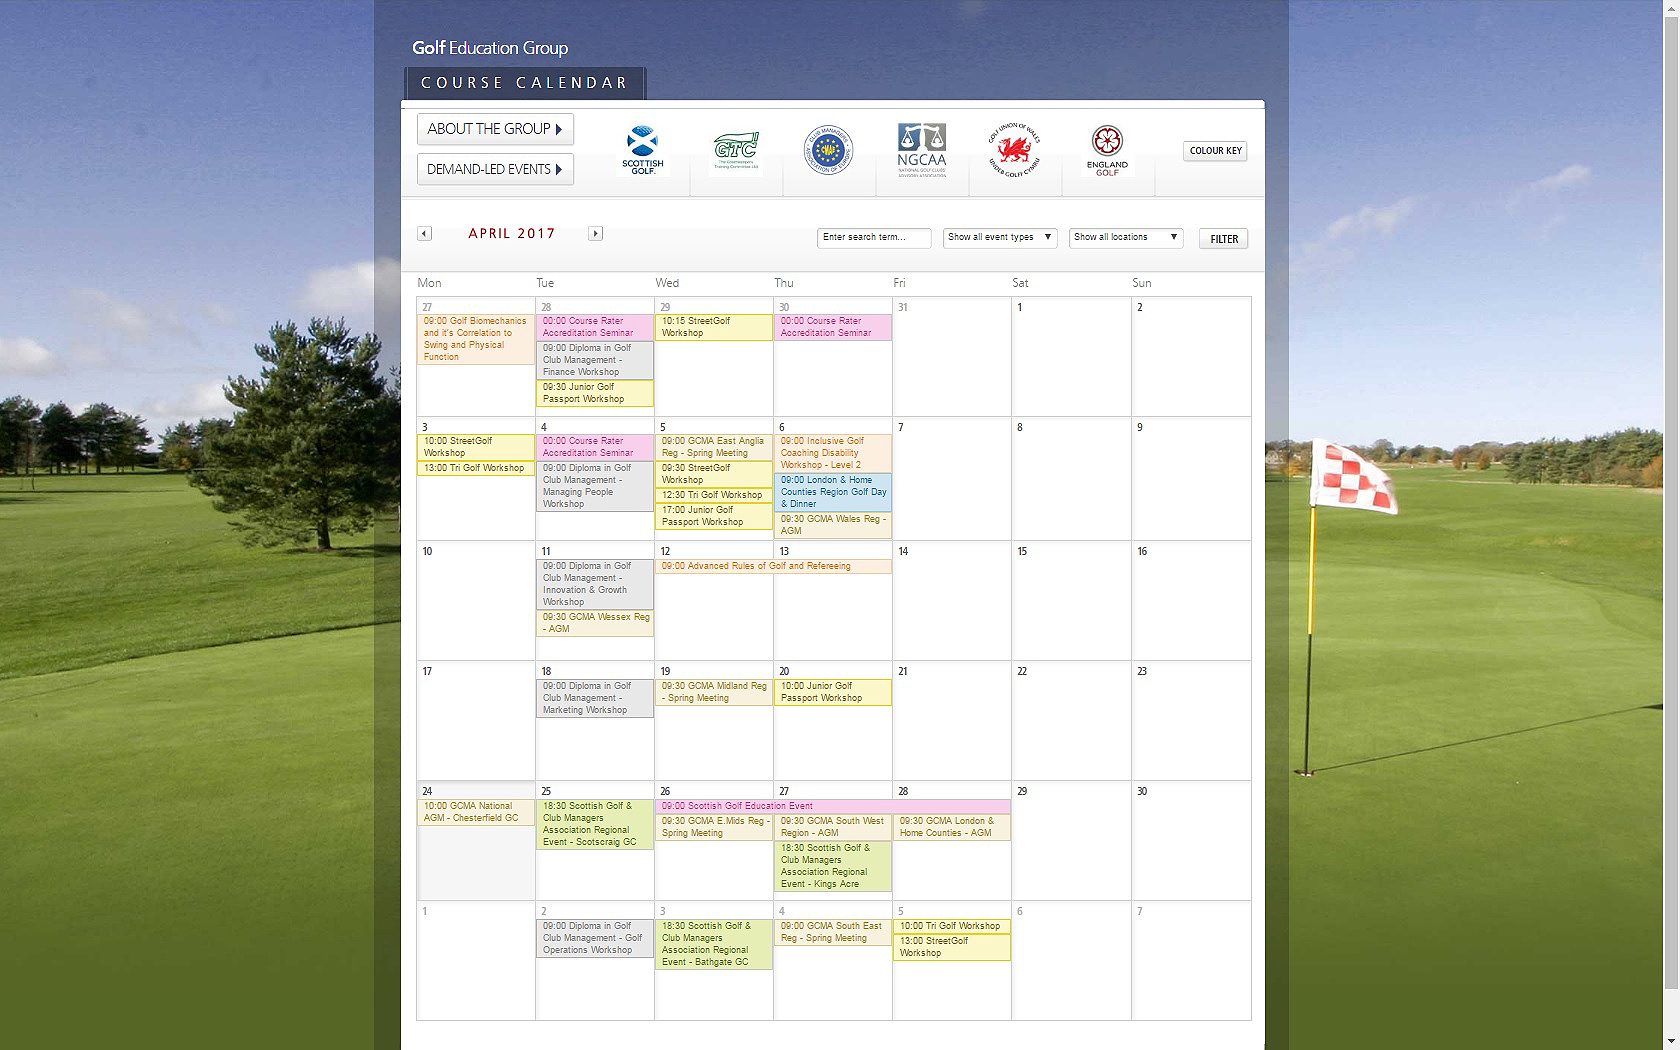 Pictured - the golf education calendar